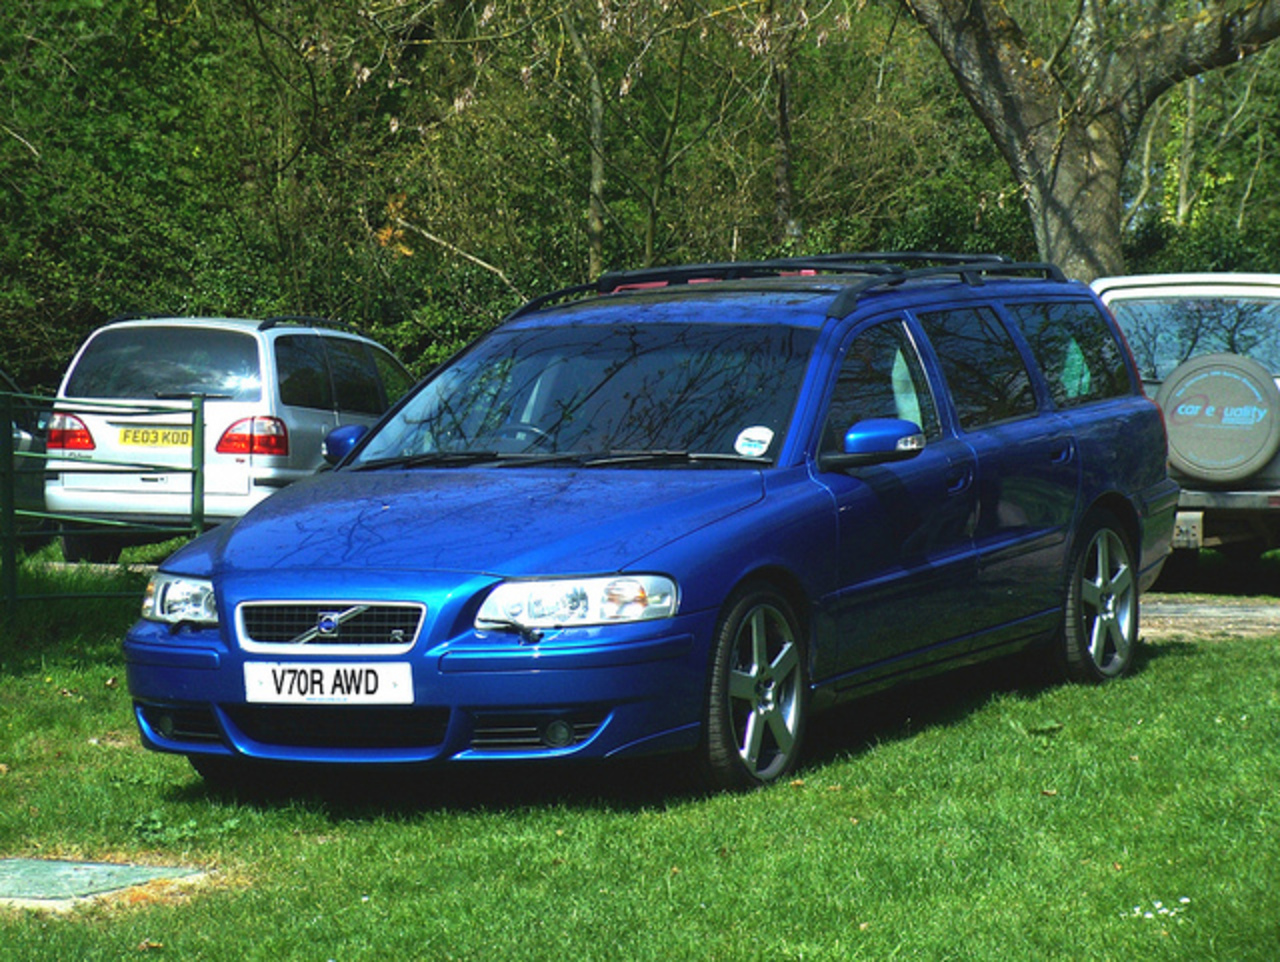 Volvo V70 R AWD Touring. View Download Wallpaper. 640x481. Comments